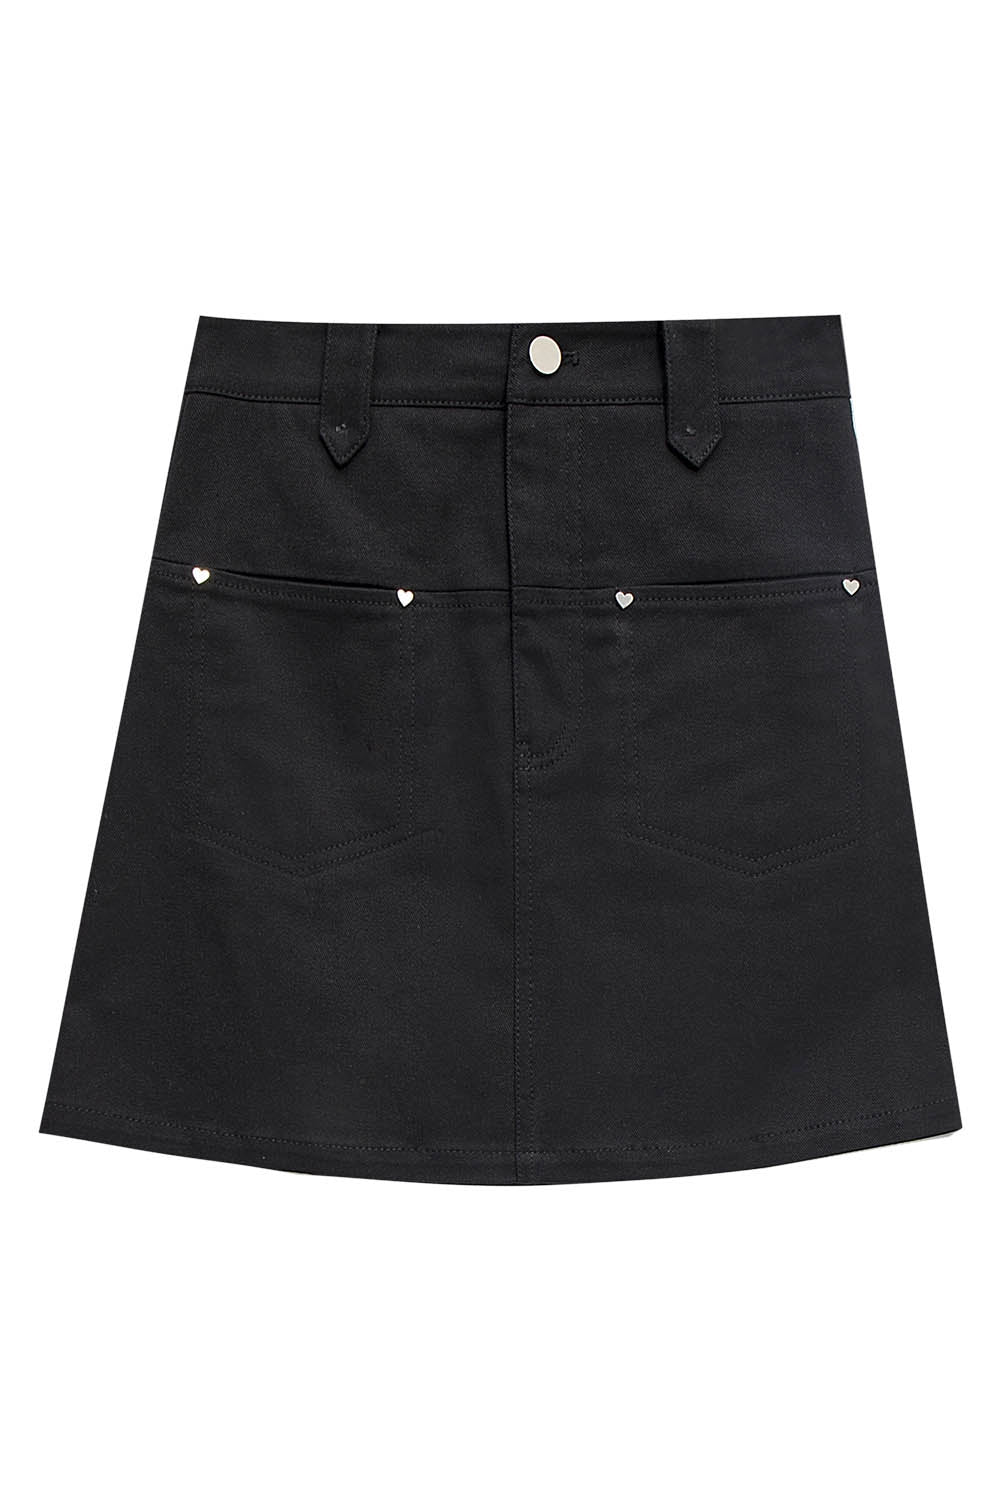 Woman's High-Waisted A-Line Mini Skirt with Pocket Detail